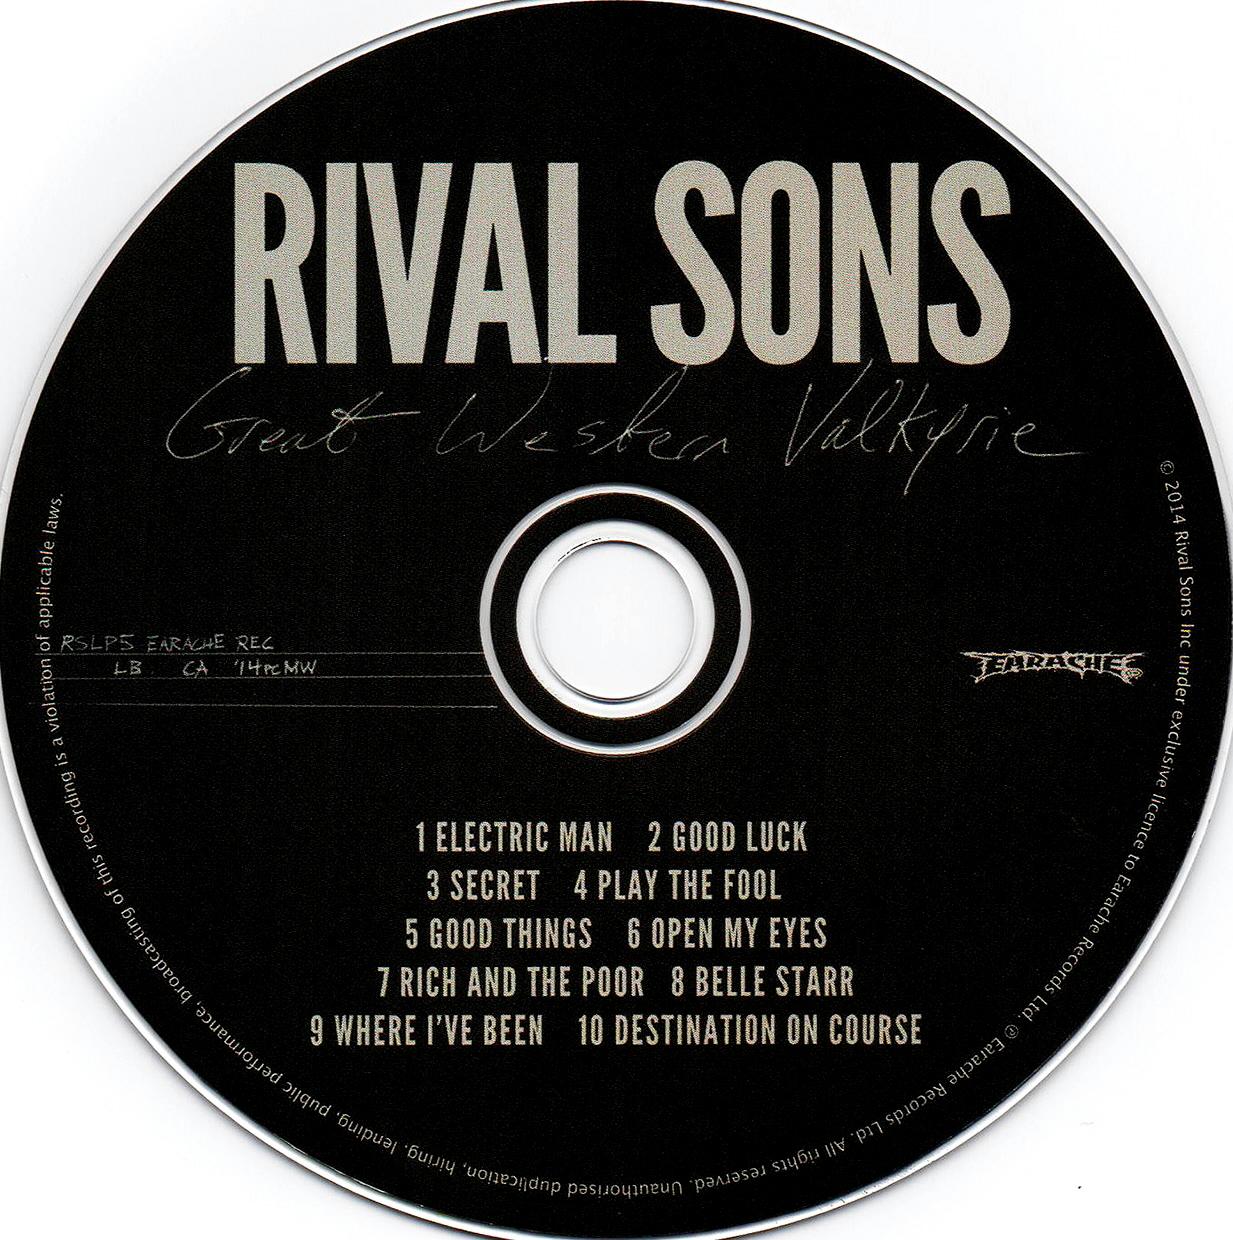 Son collection. Rival sons great Western Valkyrie. Rival sons\great Western Valkyrie (2014). Rival sons great Western Valkyrie album Cover. Rival sons фото.